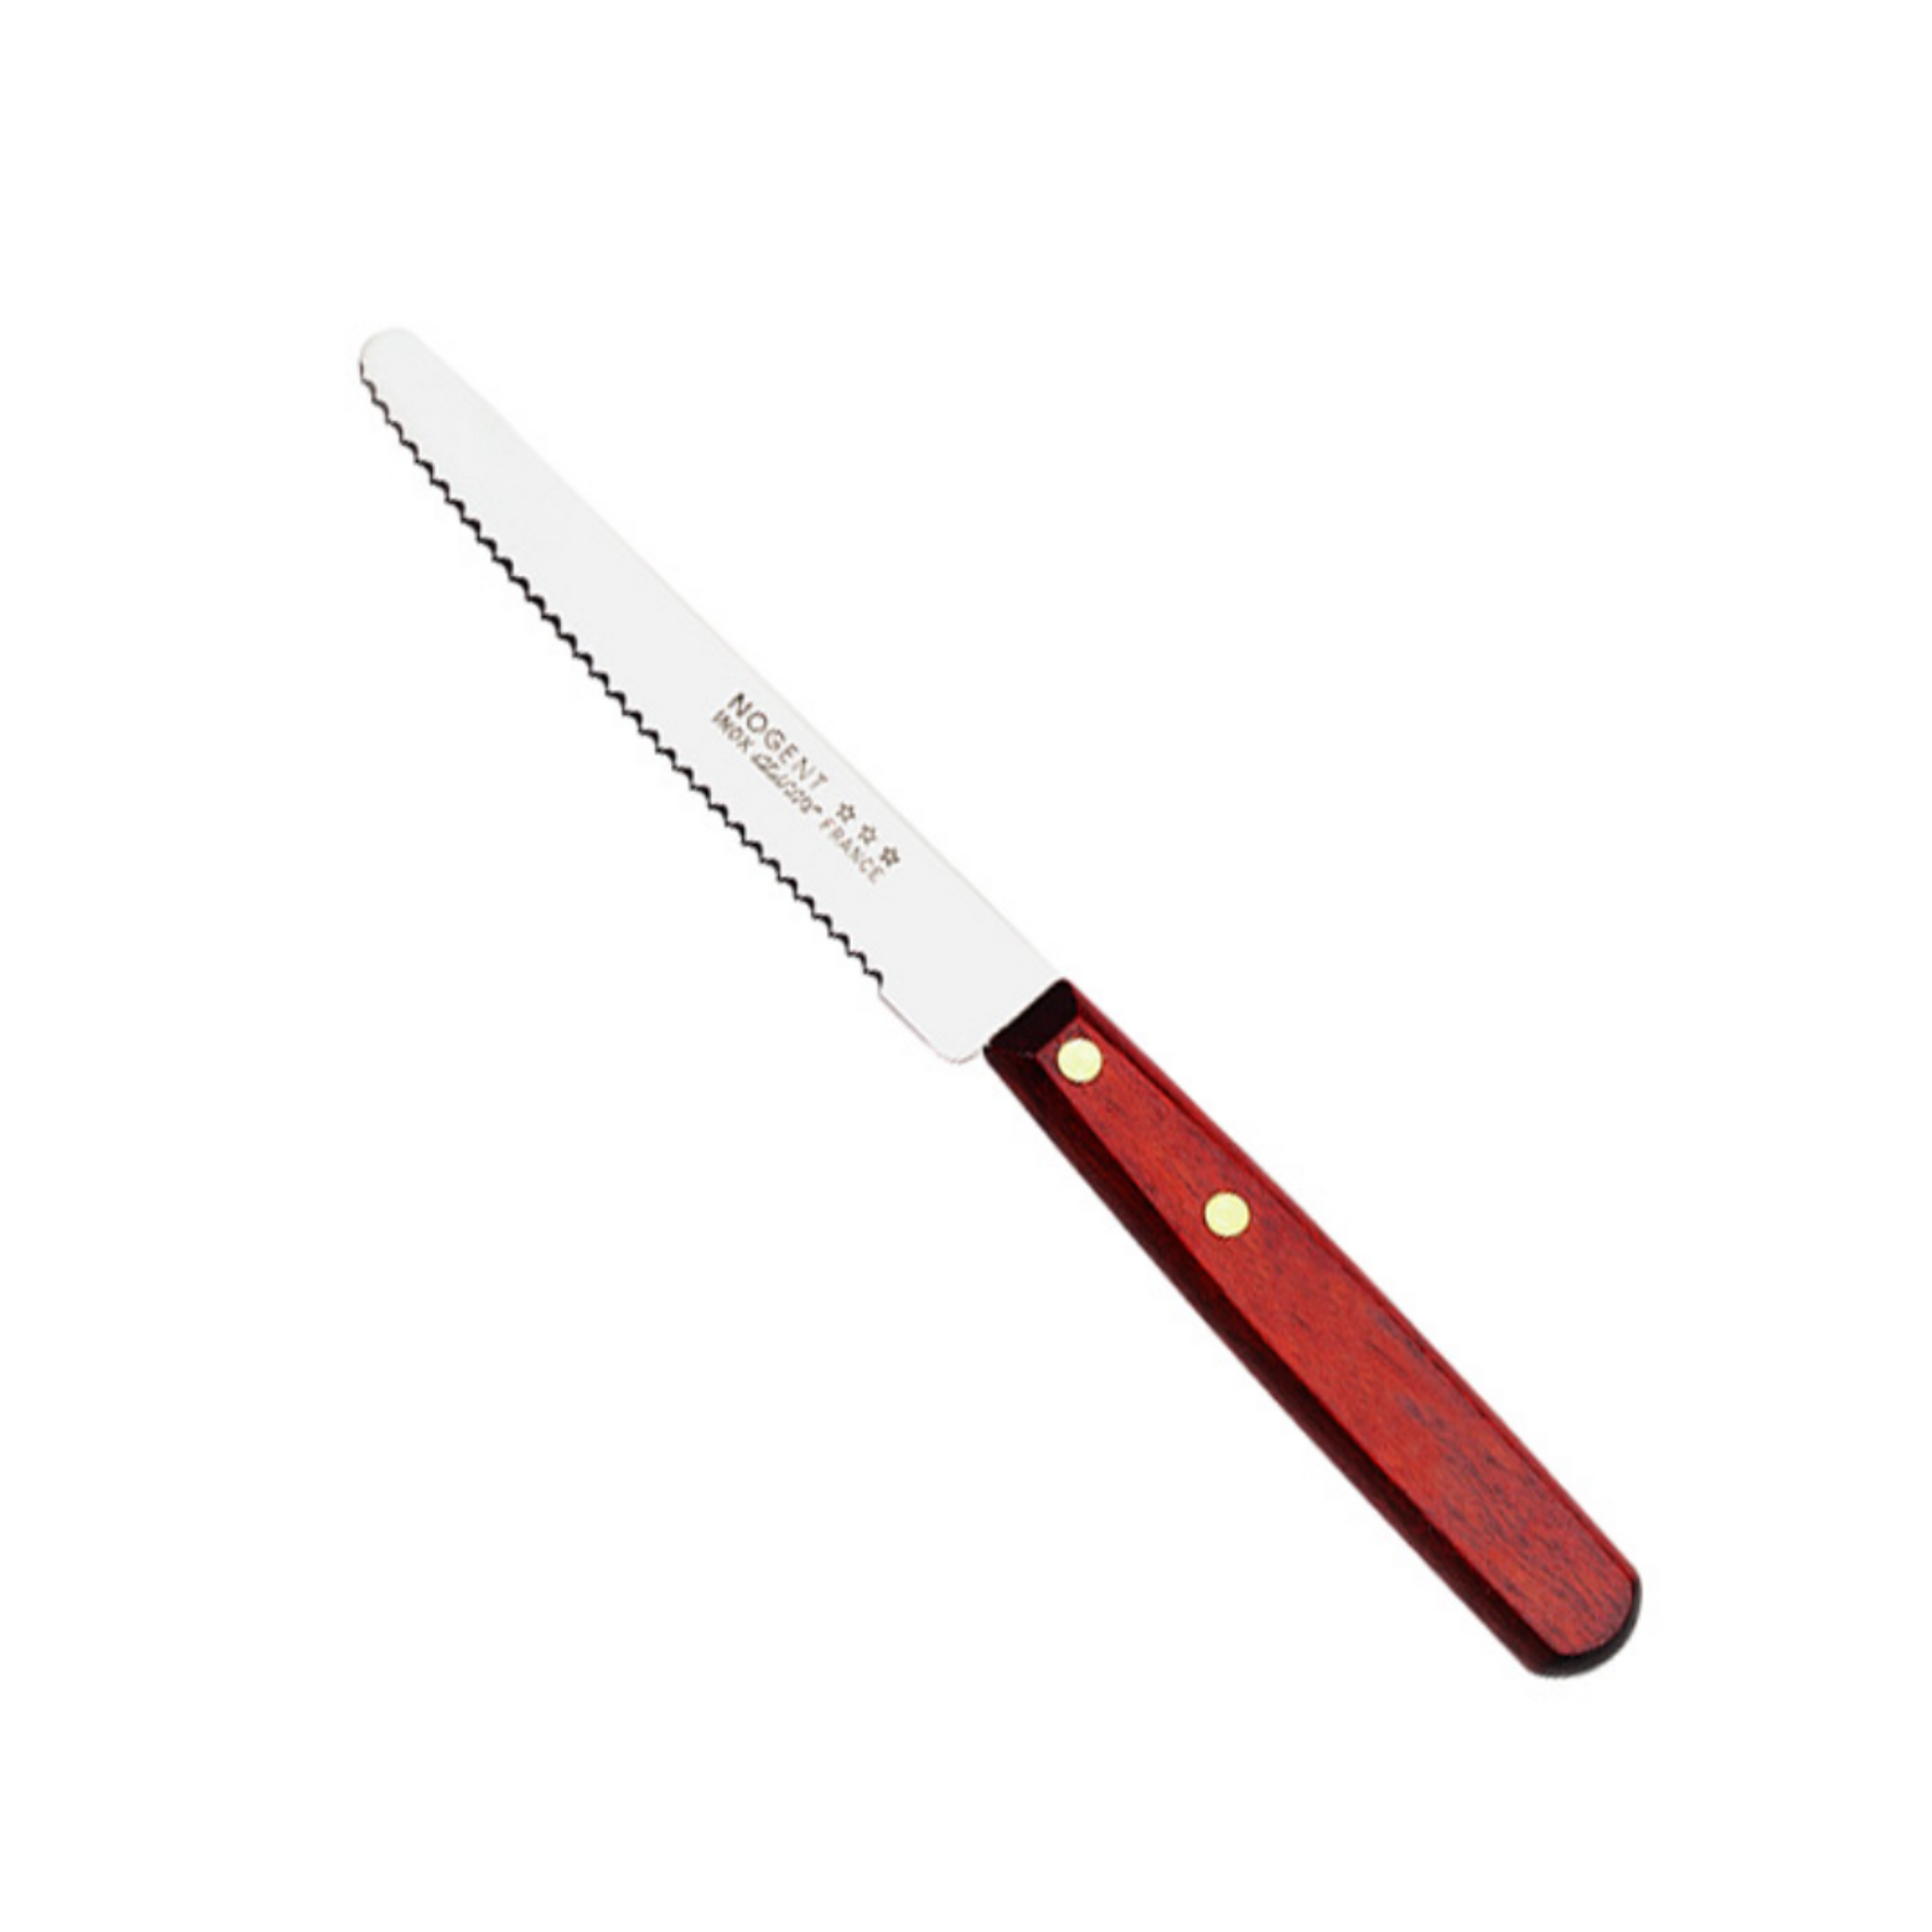 Nogent Canada Table Brunch knife made in France Clementine Boutique